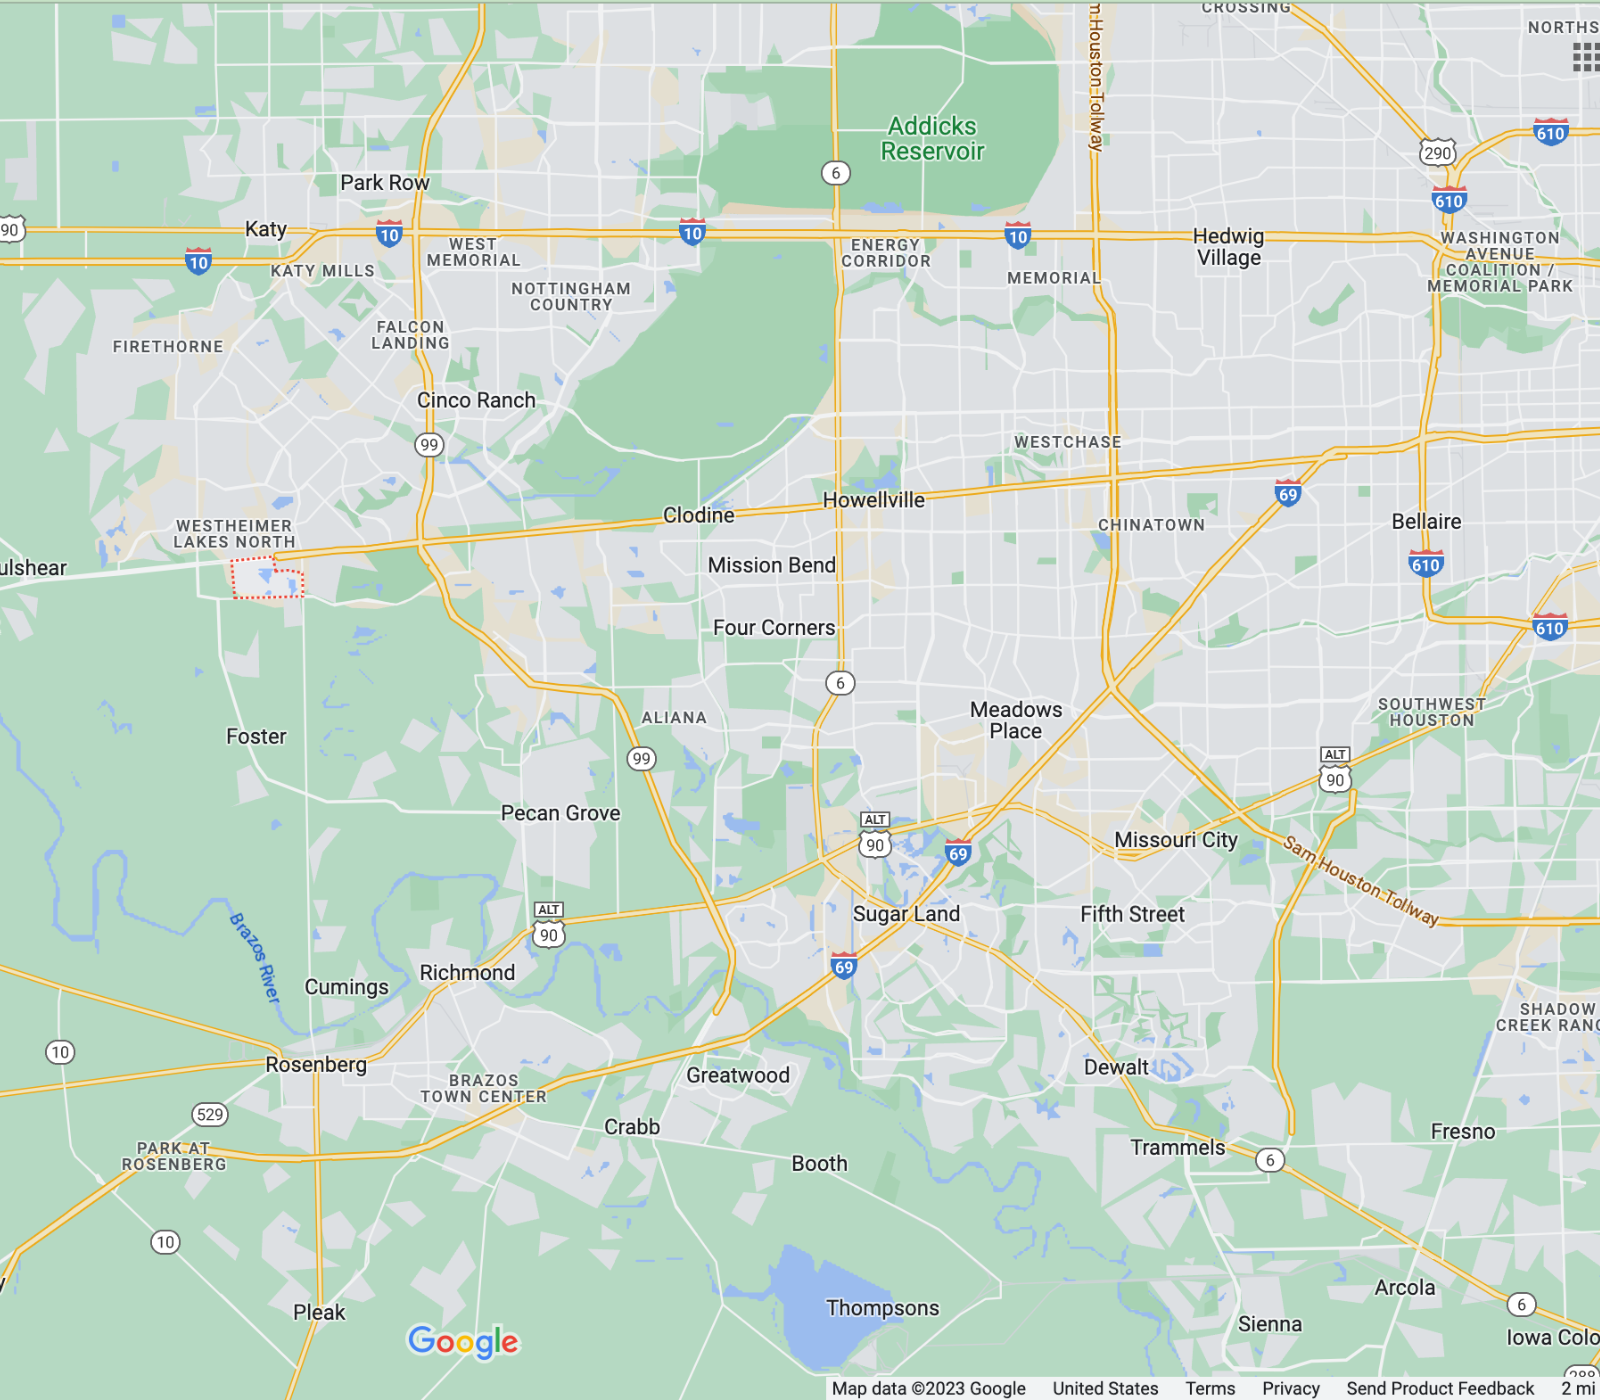 Westheimer Lakes (Master Planned) Map